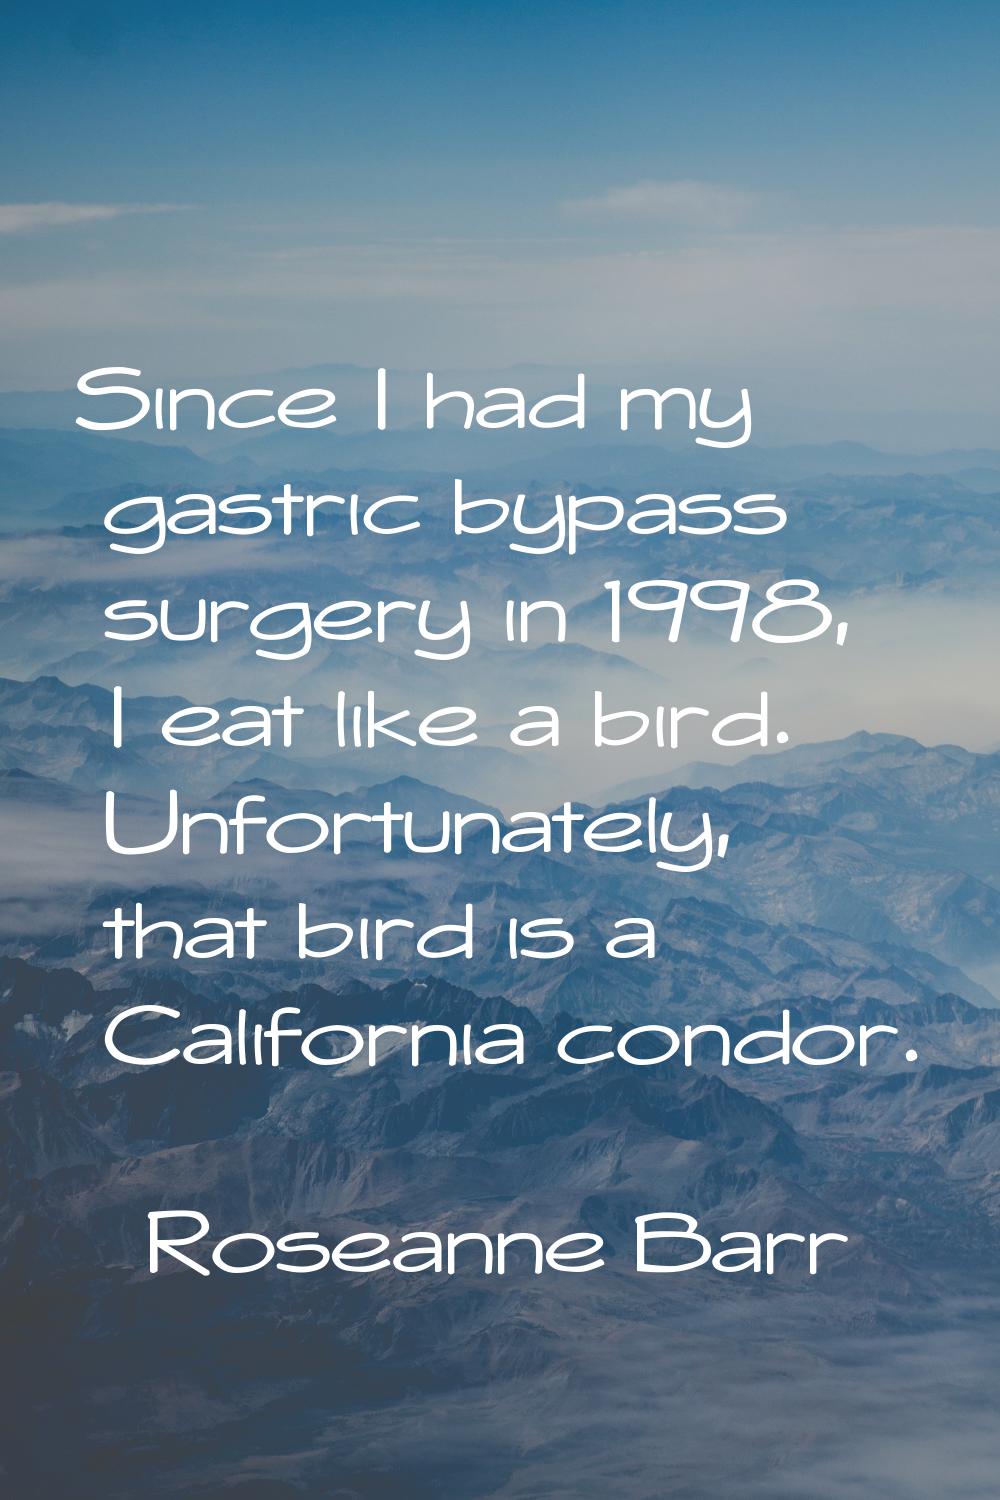 Since I had my gastric bypass surgery in 1998, I eat like a bird. Unfortunately, that bird is a Cal